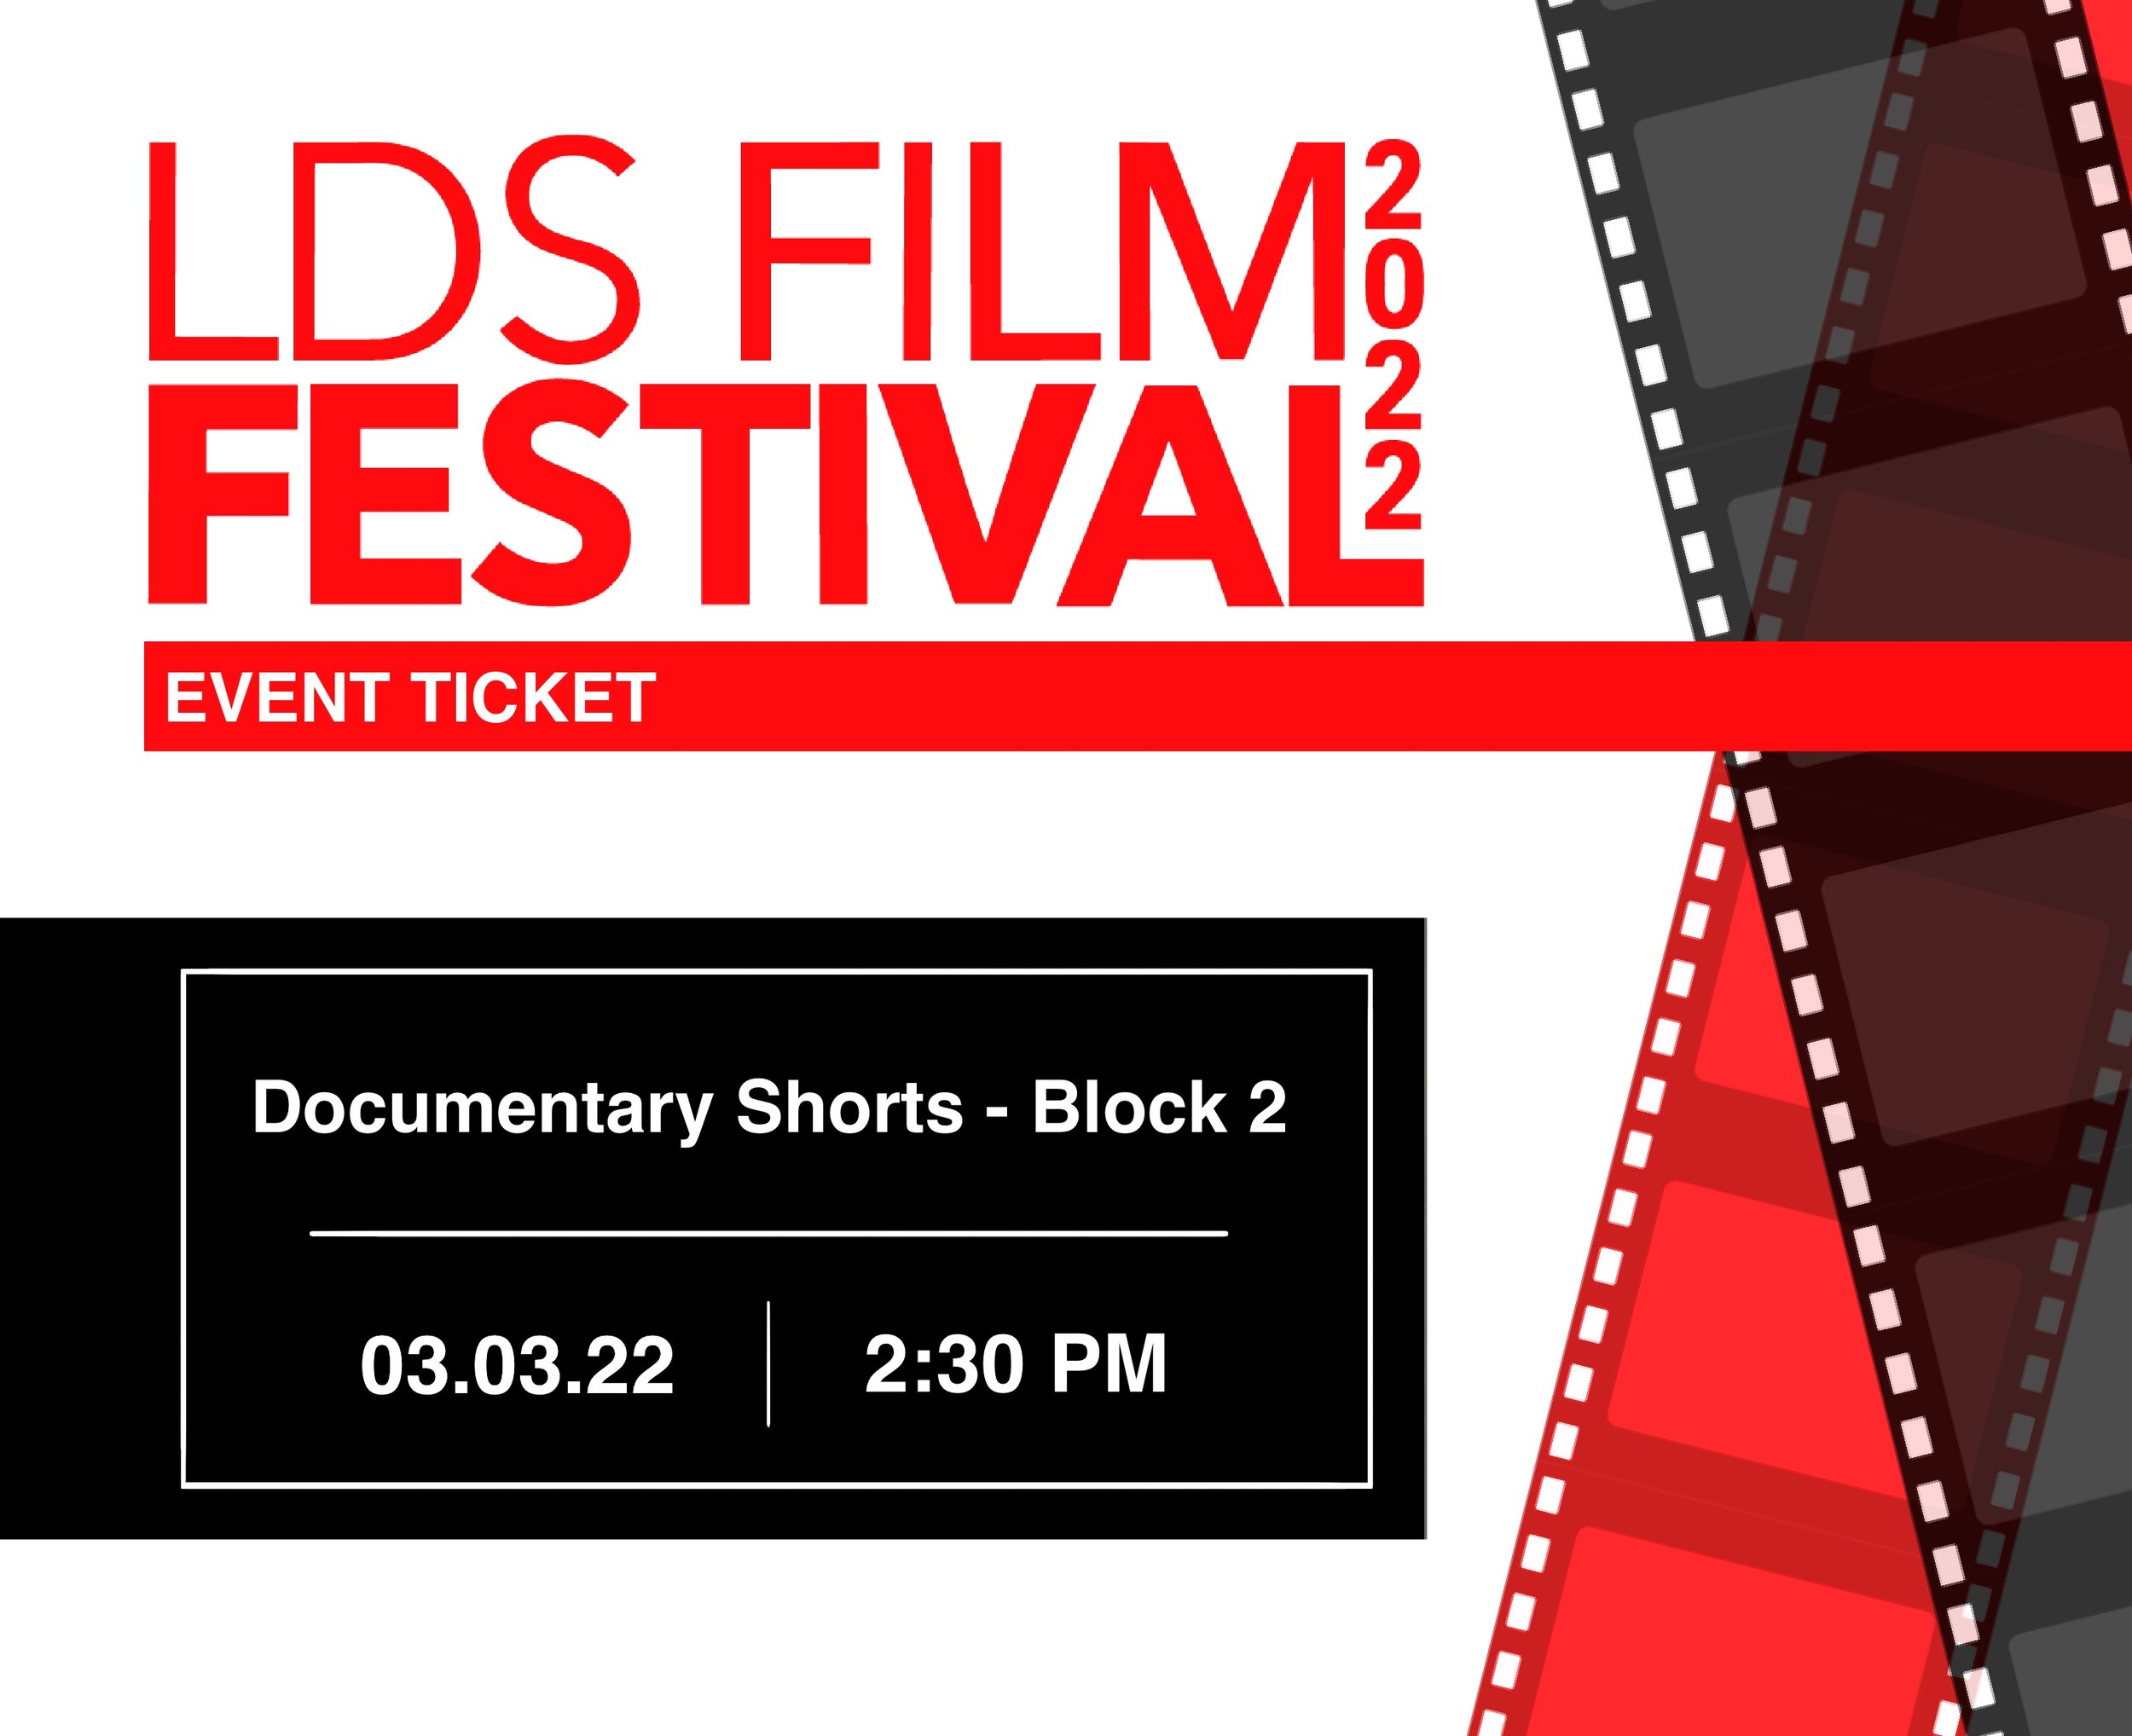 DOC SHORT - Block 203.03.22 | 2:30 PM Showhouse II Theatre - Block 2 screenings include: Bright Lights in the DesertThe Pilgrimage to MagdalenaPressed Floral Redeemed: The Sione Havili StoryQ&A’s with filmmakers 